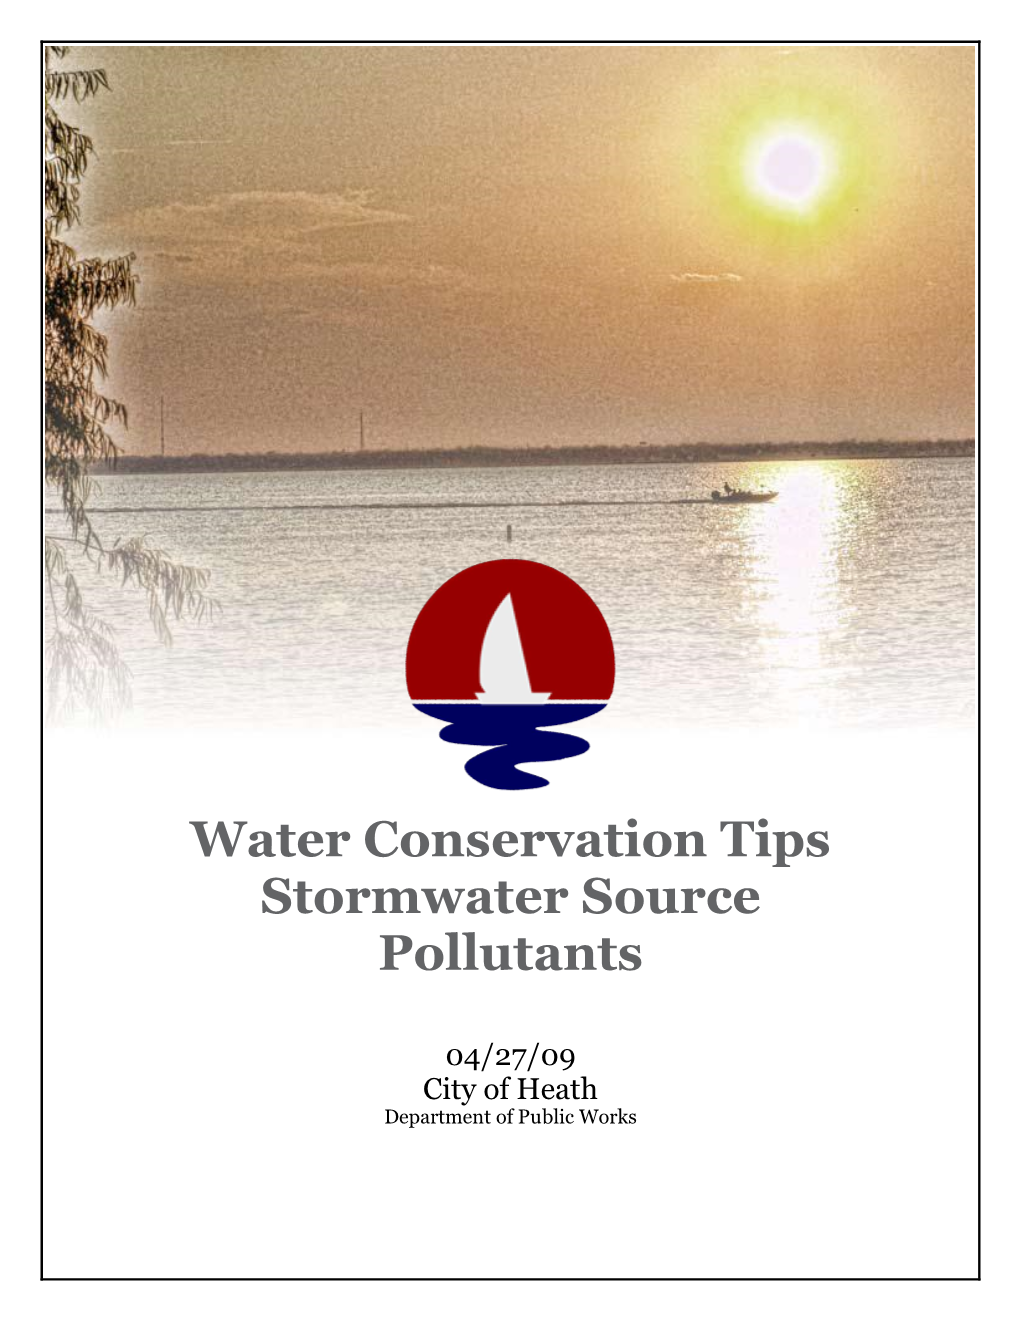 Water Conservation Tips Stormwater Source Pollutants